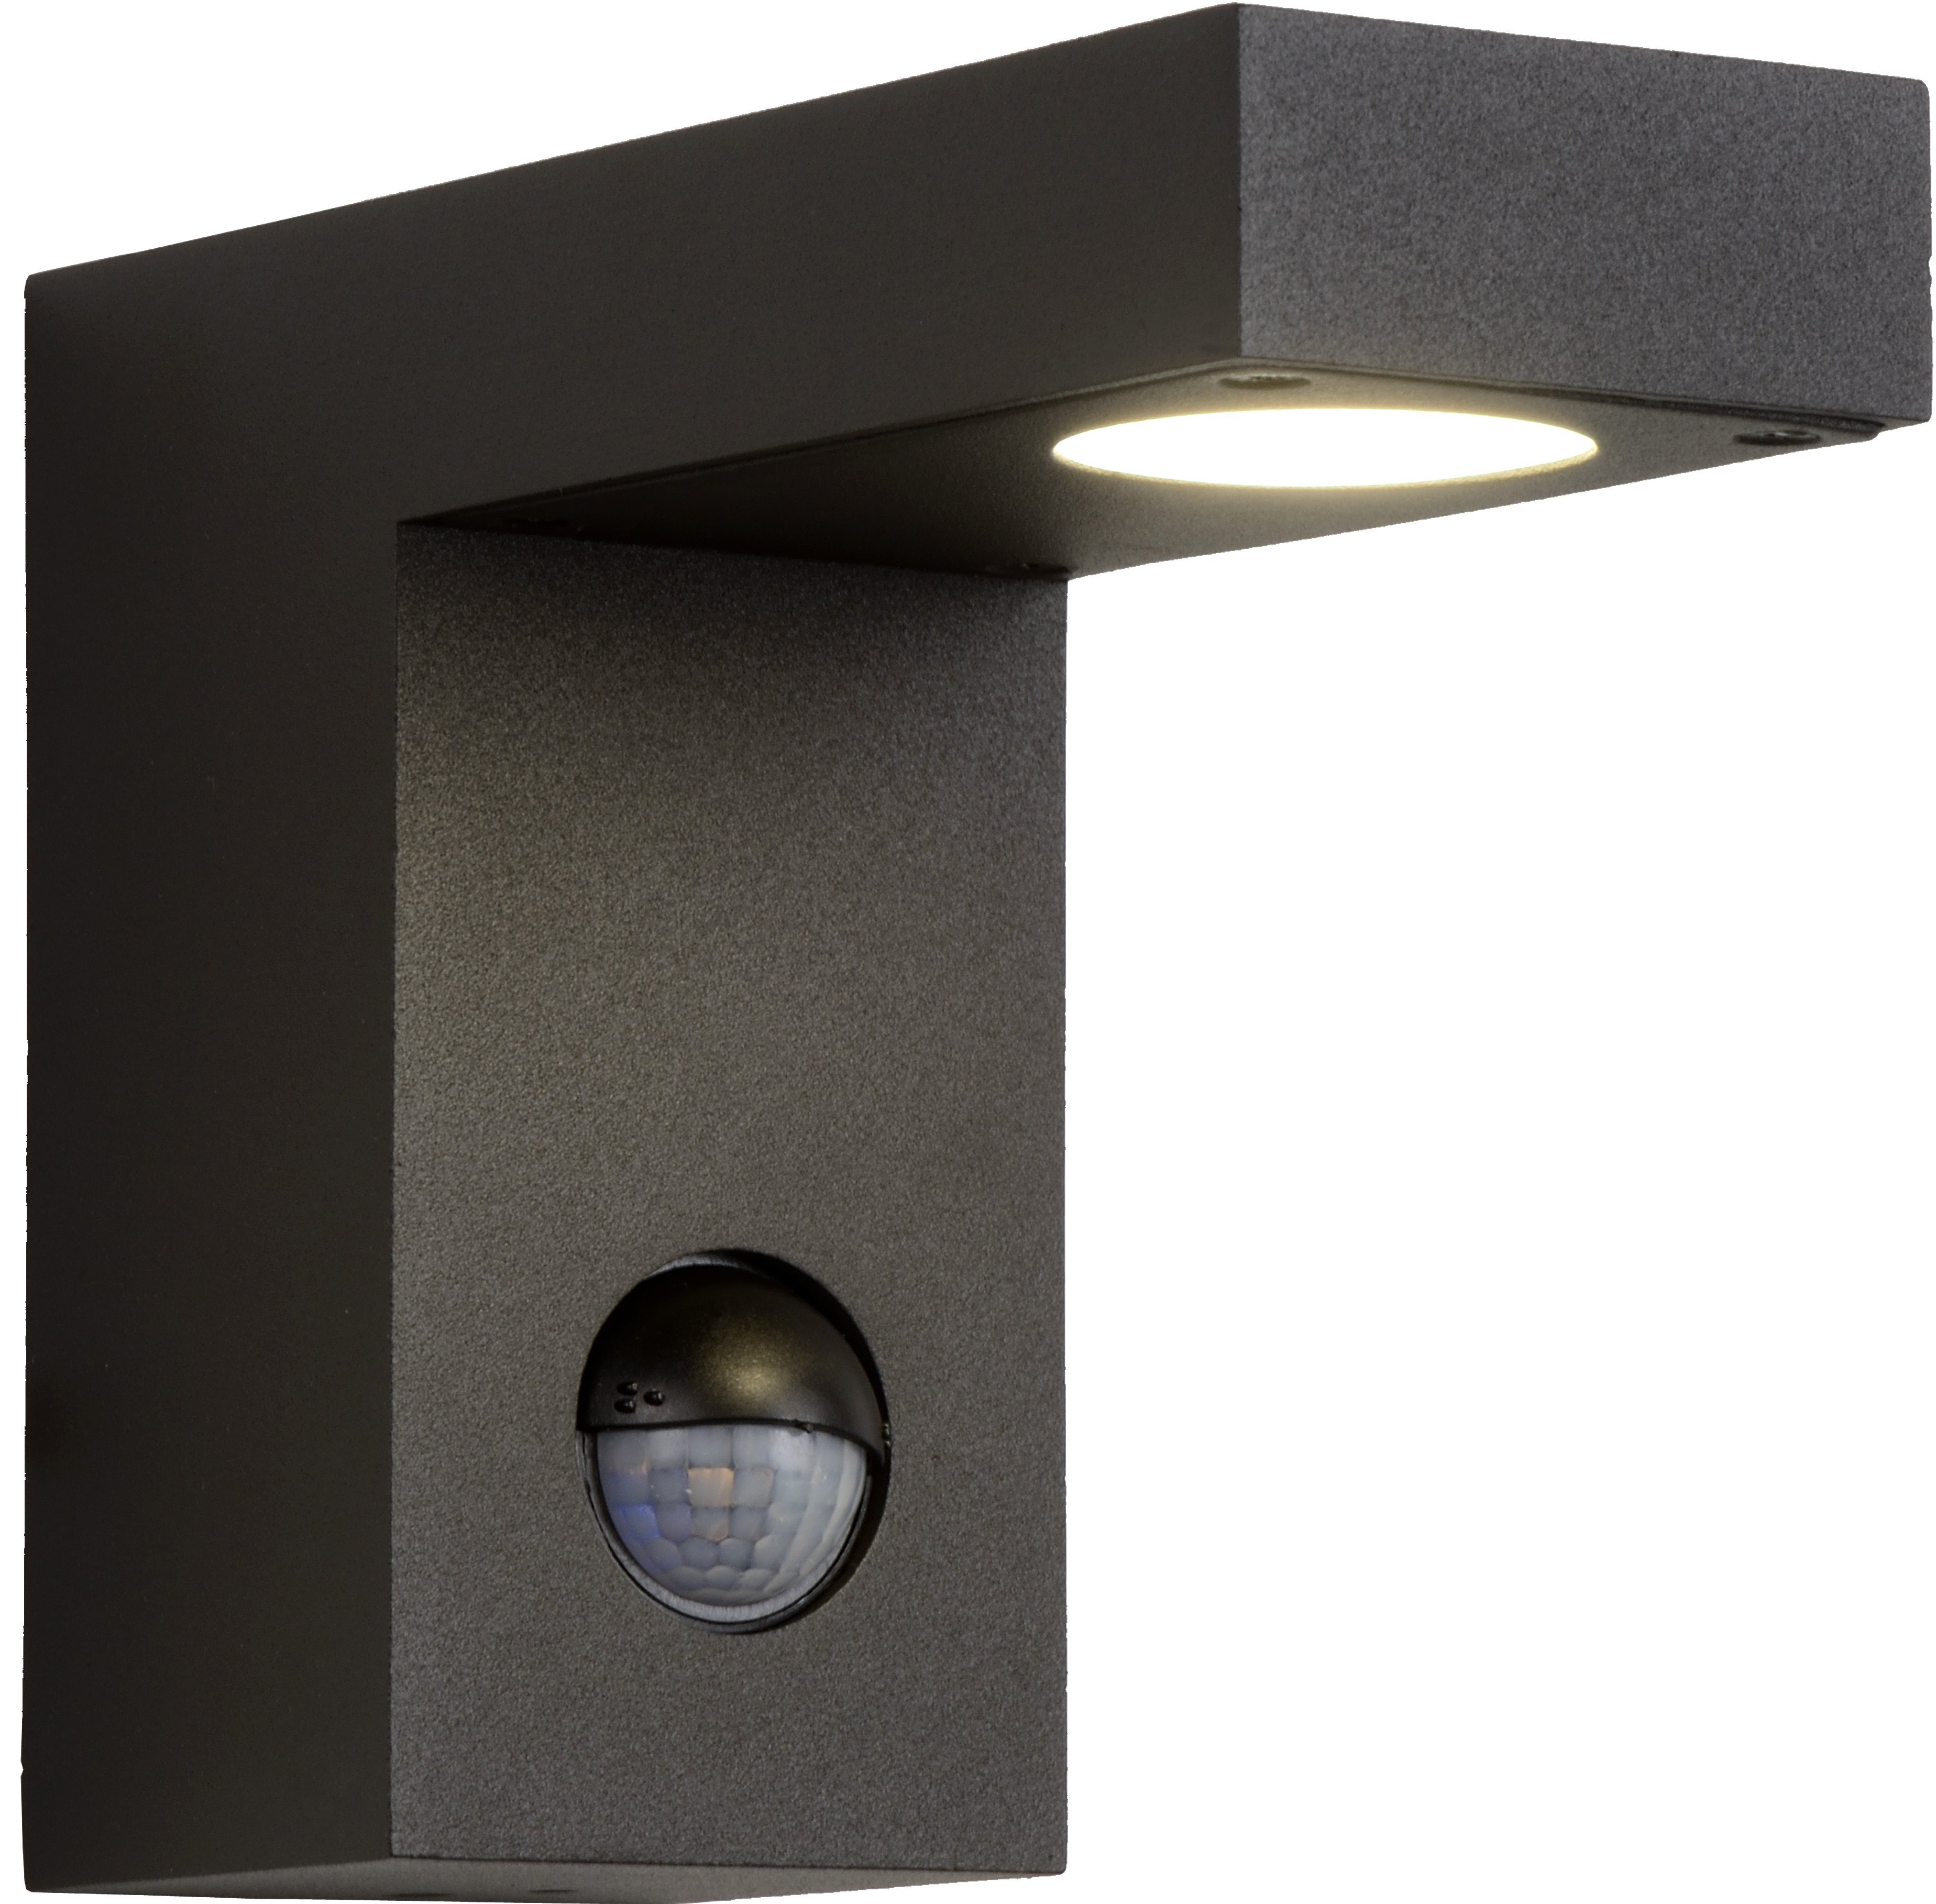 Lucide texas led ir buitenlamp by 288502430